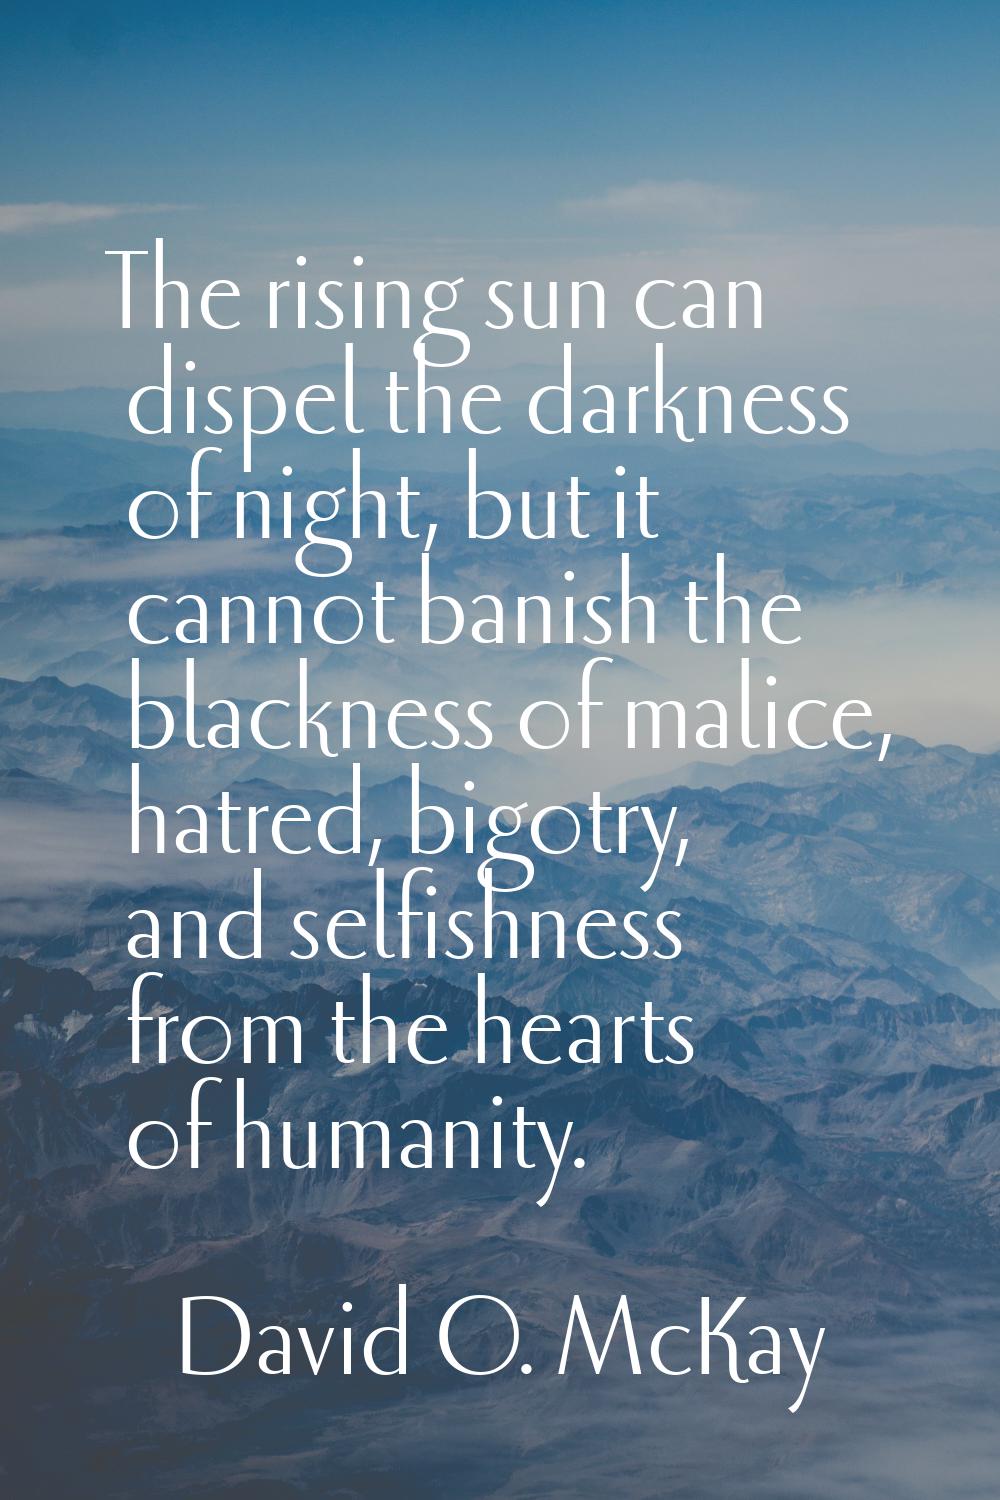 The rising sun can dispel the darkness of night, but it cannot banish the blackness of malice, hatr